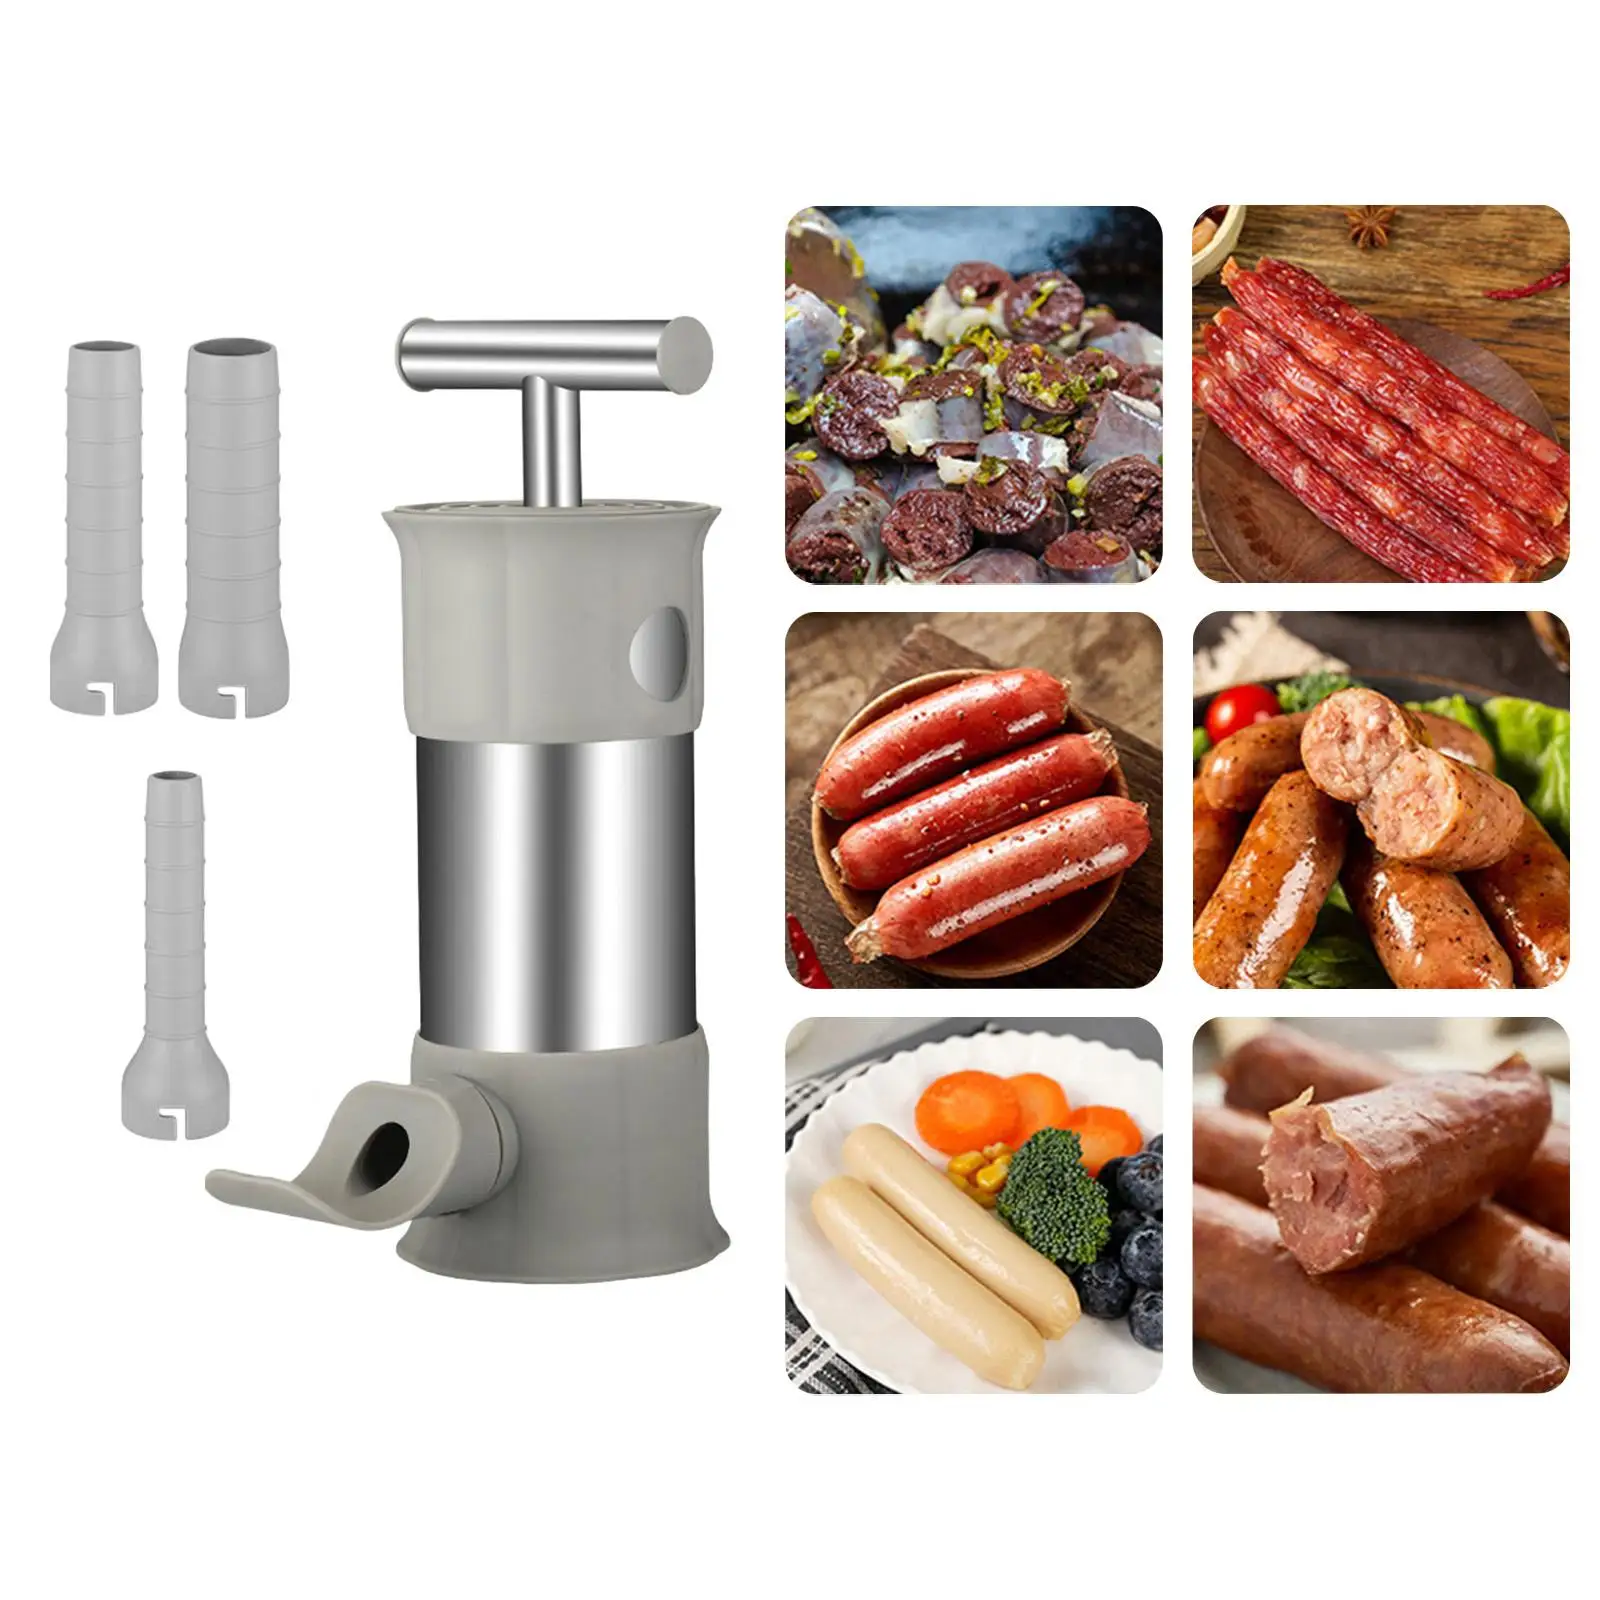 Sausage Stuffer Manual with 4 Nozzle Attachments for Home Gadgets Stuffing Tubes Stainless Steel Meat Sausage Machine